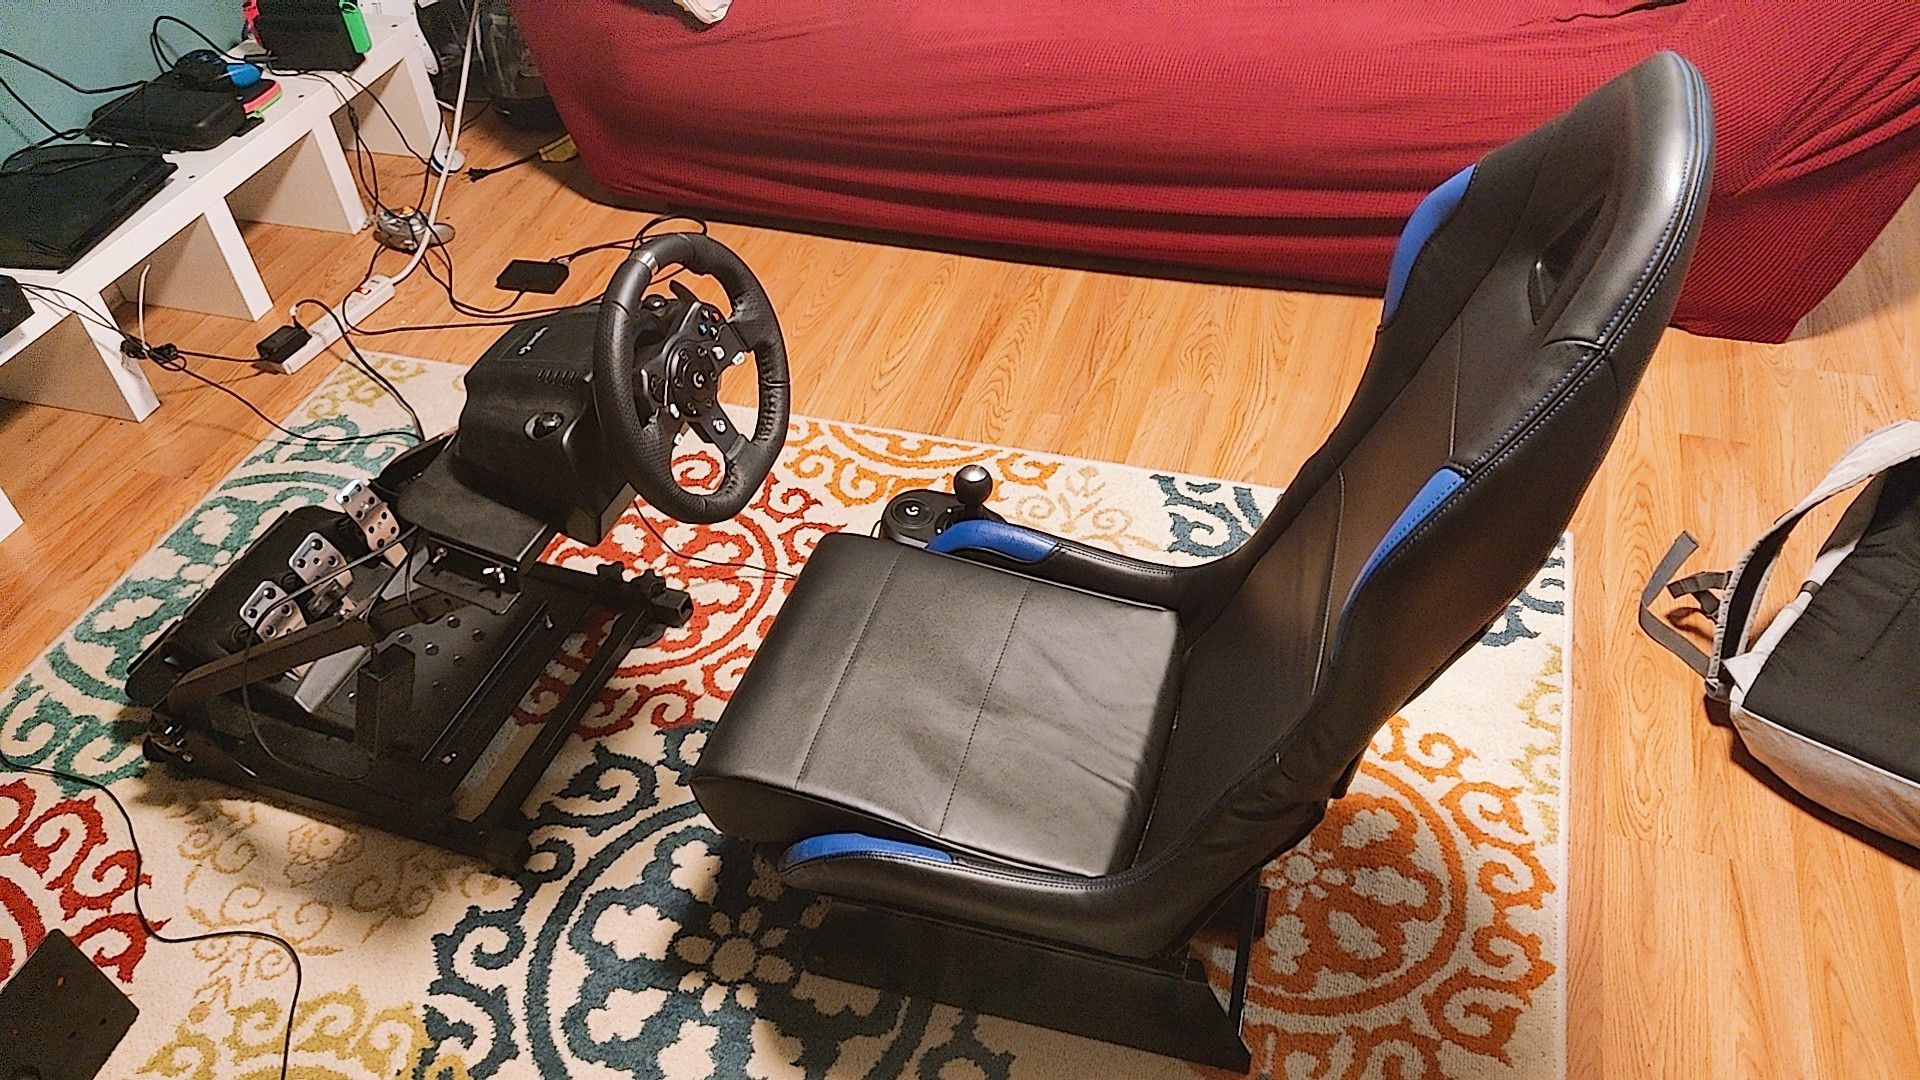 FOR PC/XBOX ONE: Logitech G29 Racing set up